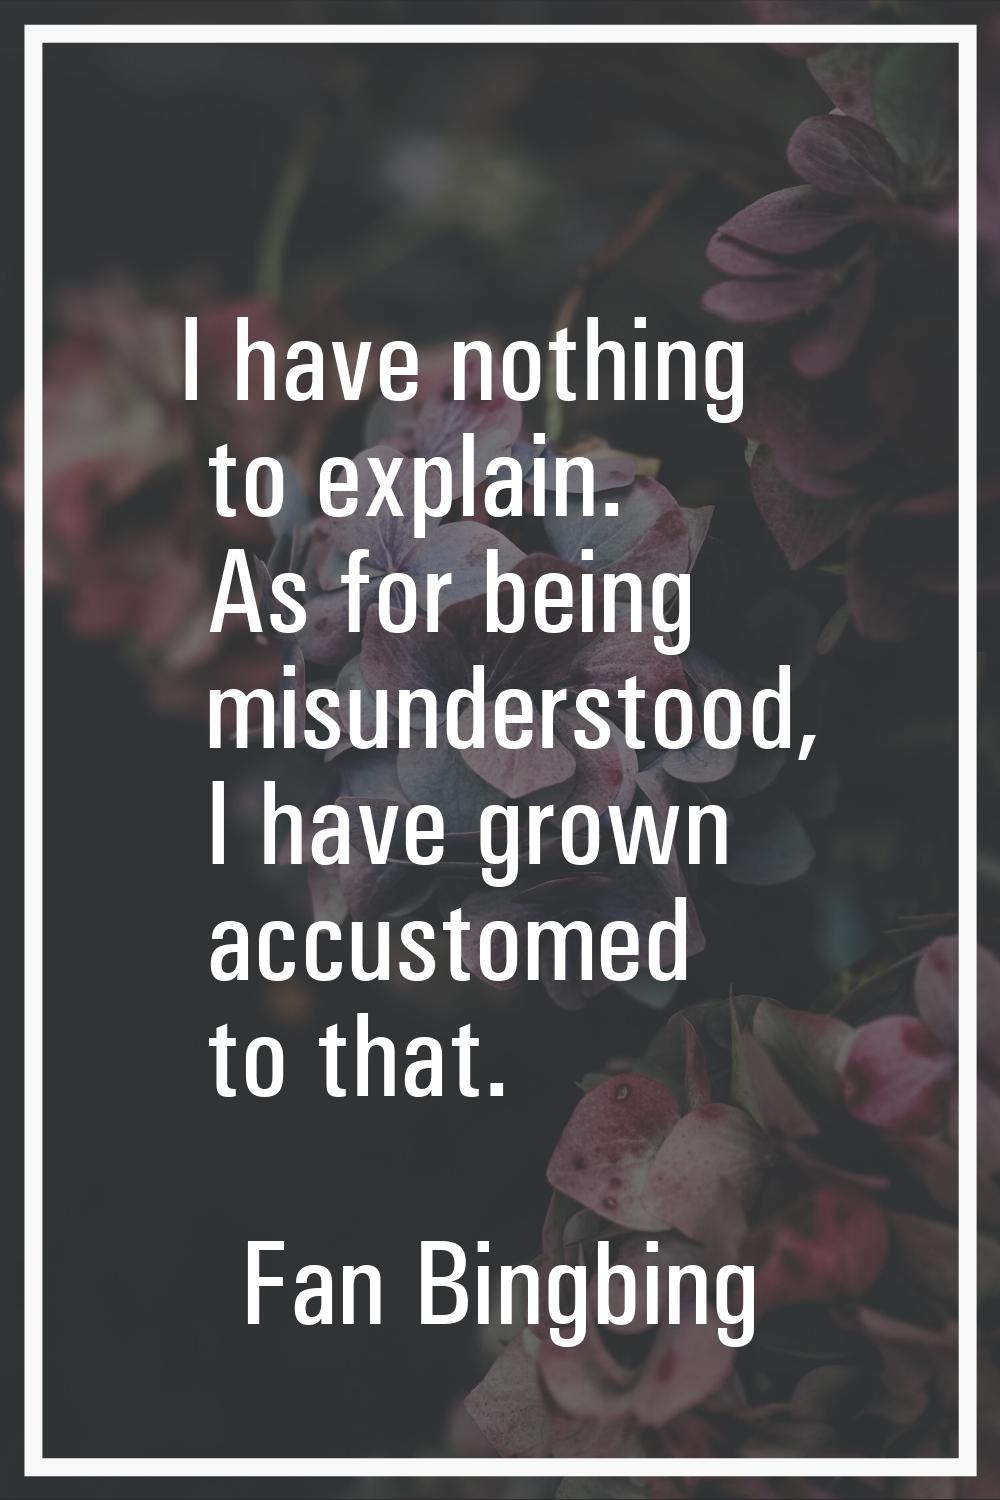 I have nothing to explain. As for being misunderstood, I have grown accustomed to that.